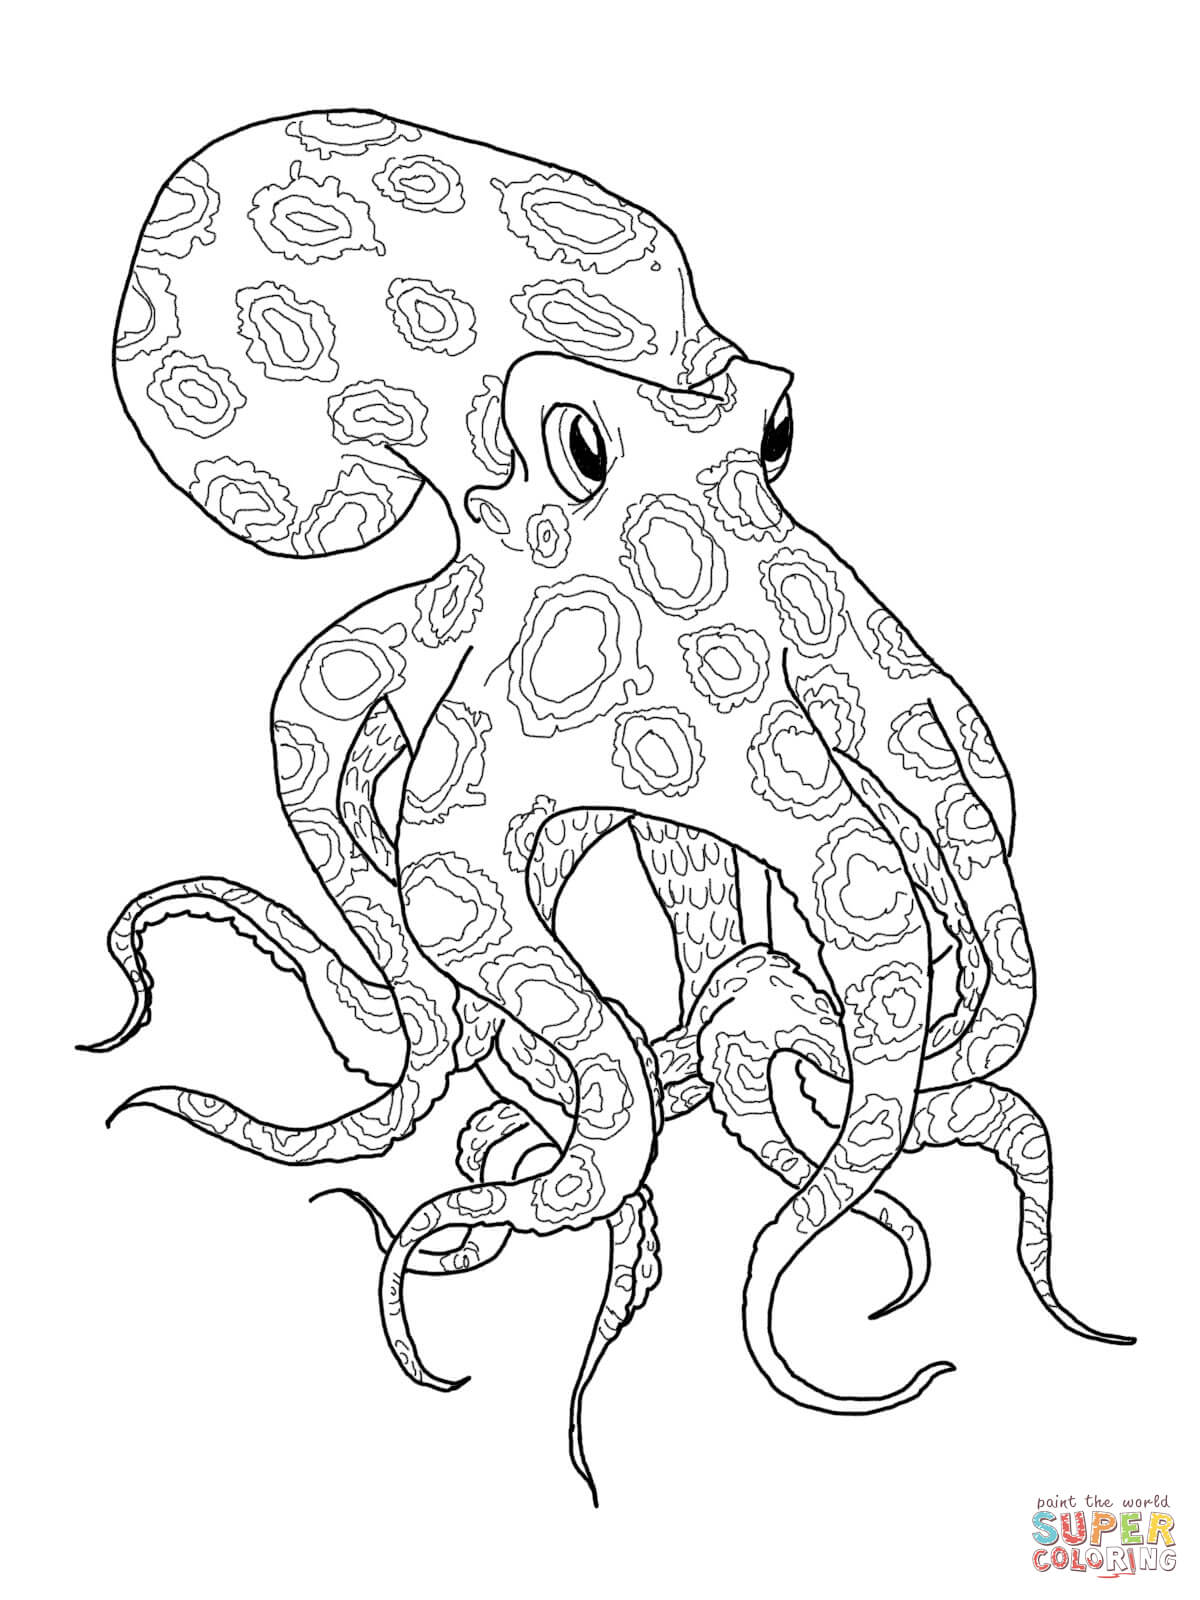 Blue Ringed Octopus coloring #9, Download drawings